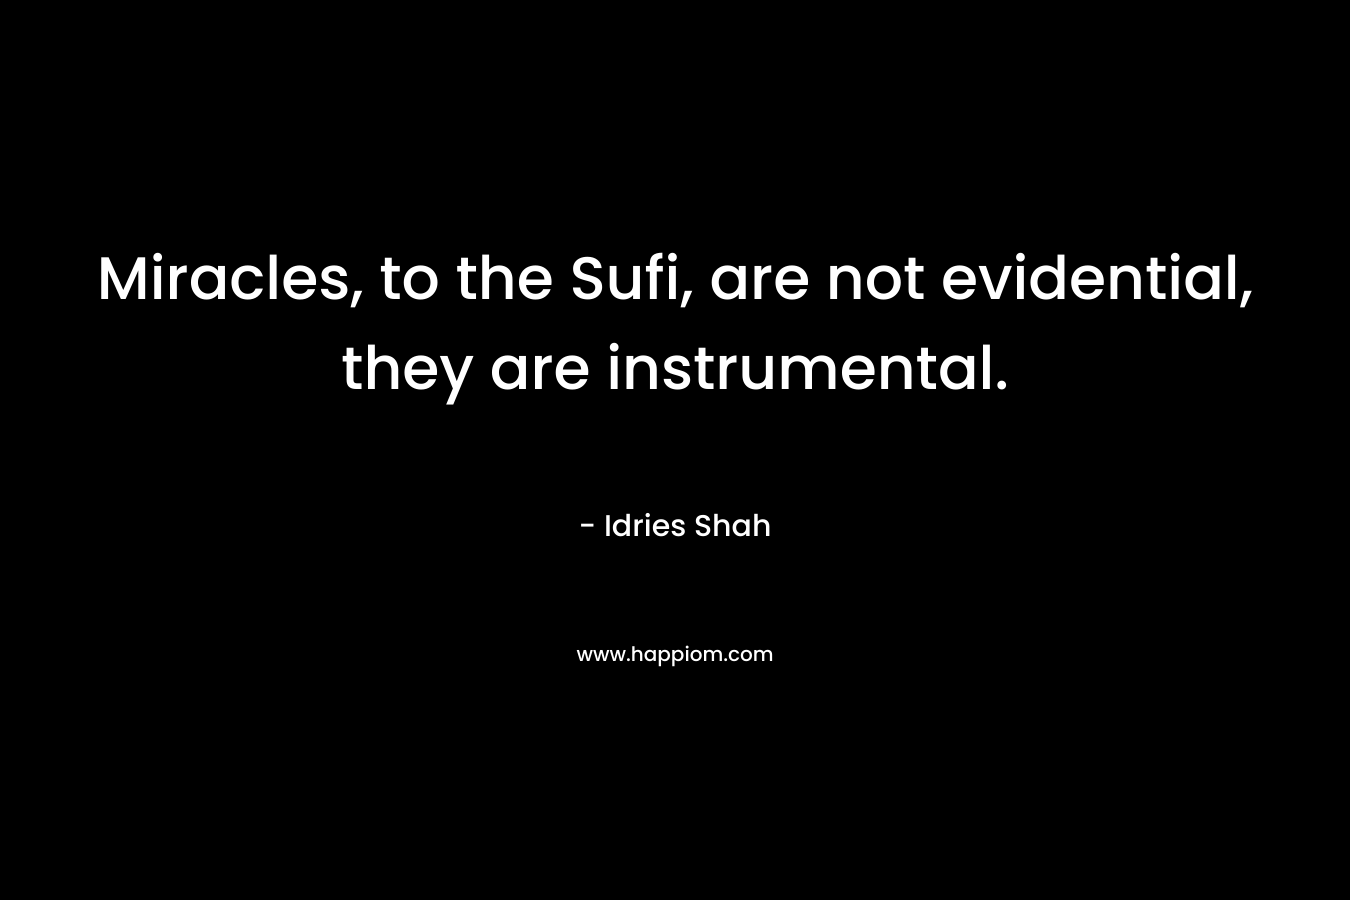 Miracles, to the Sufi, are not evidential, they are instrumental. – Idries Shah